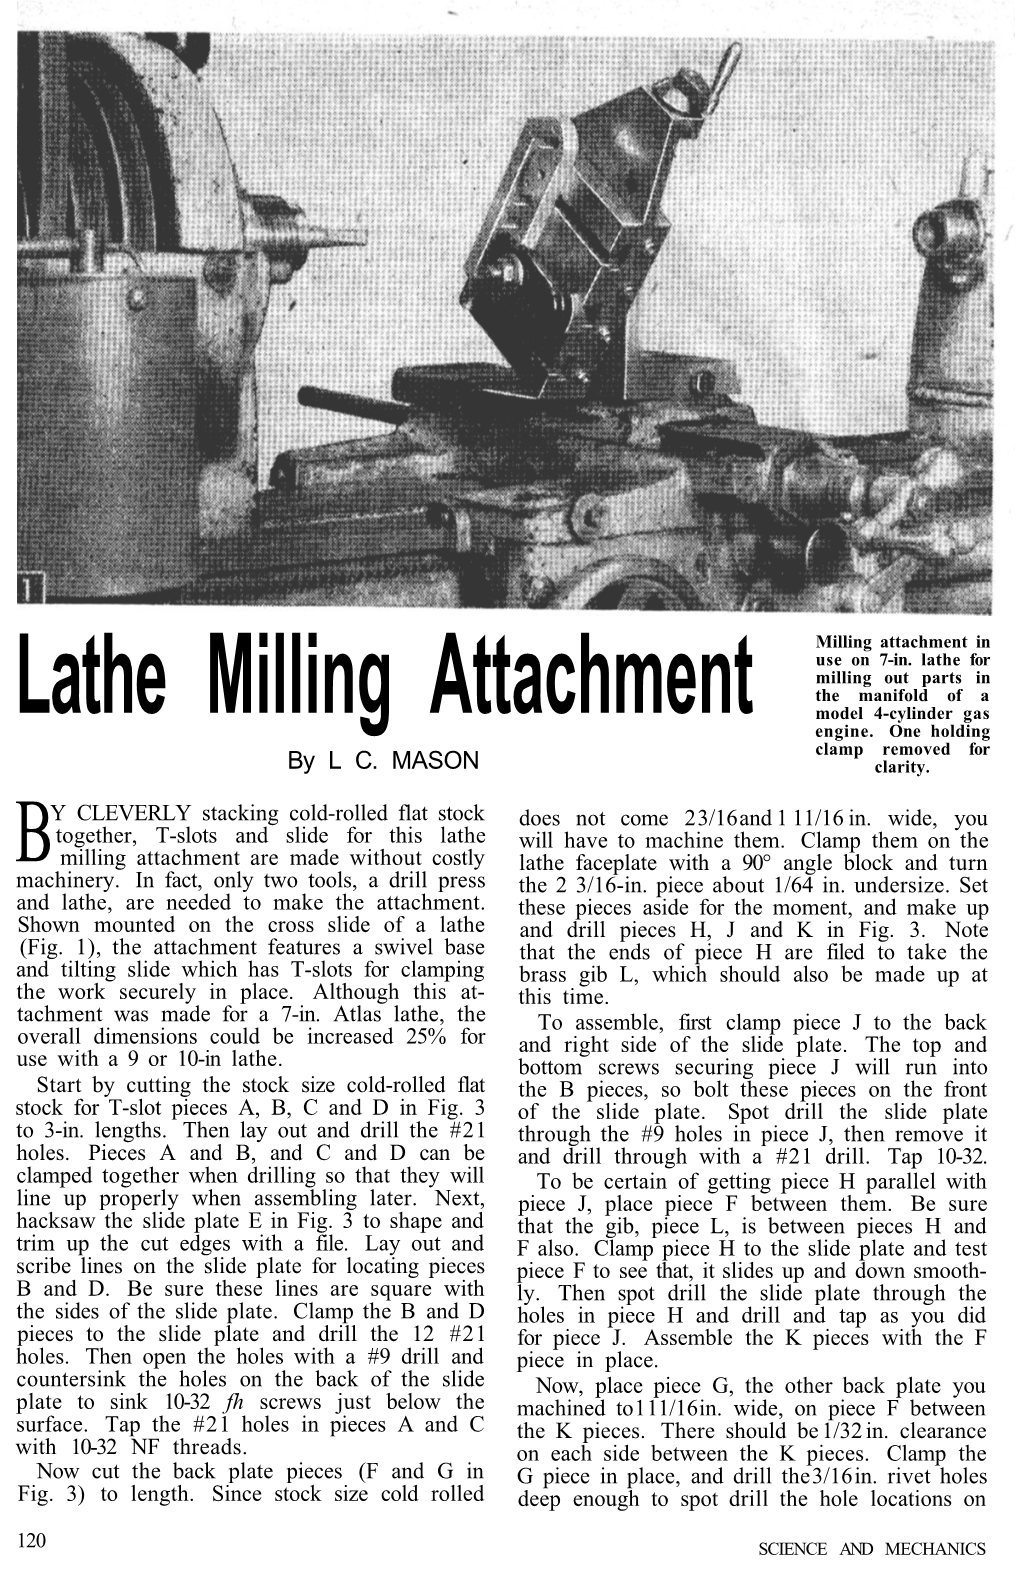 Lathe Milling Attachment Model 4-Cylinder Gas Engine